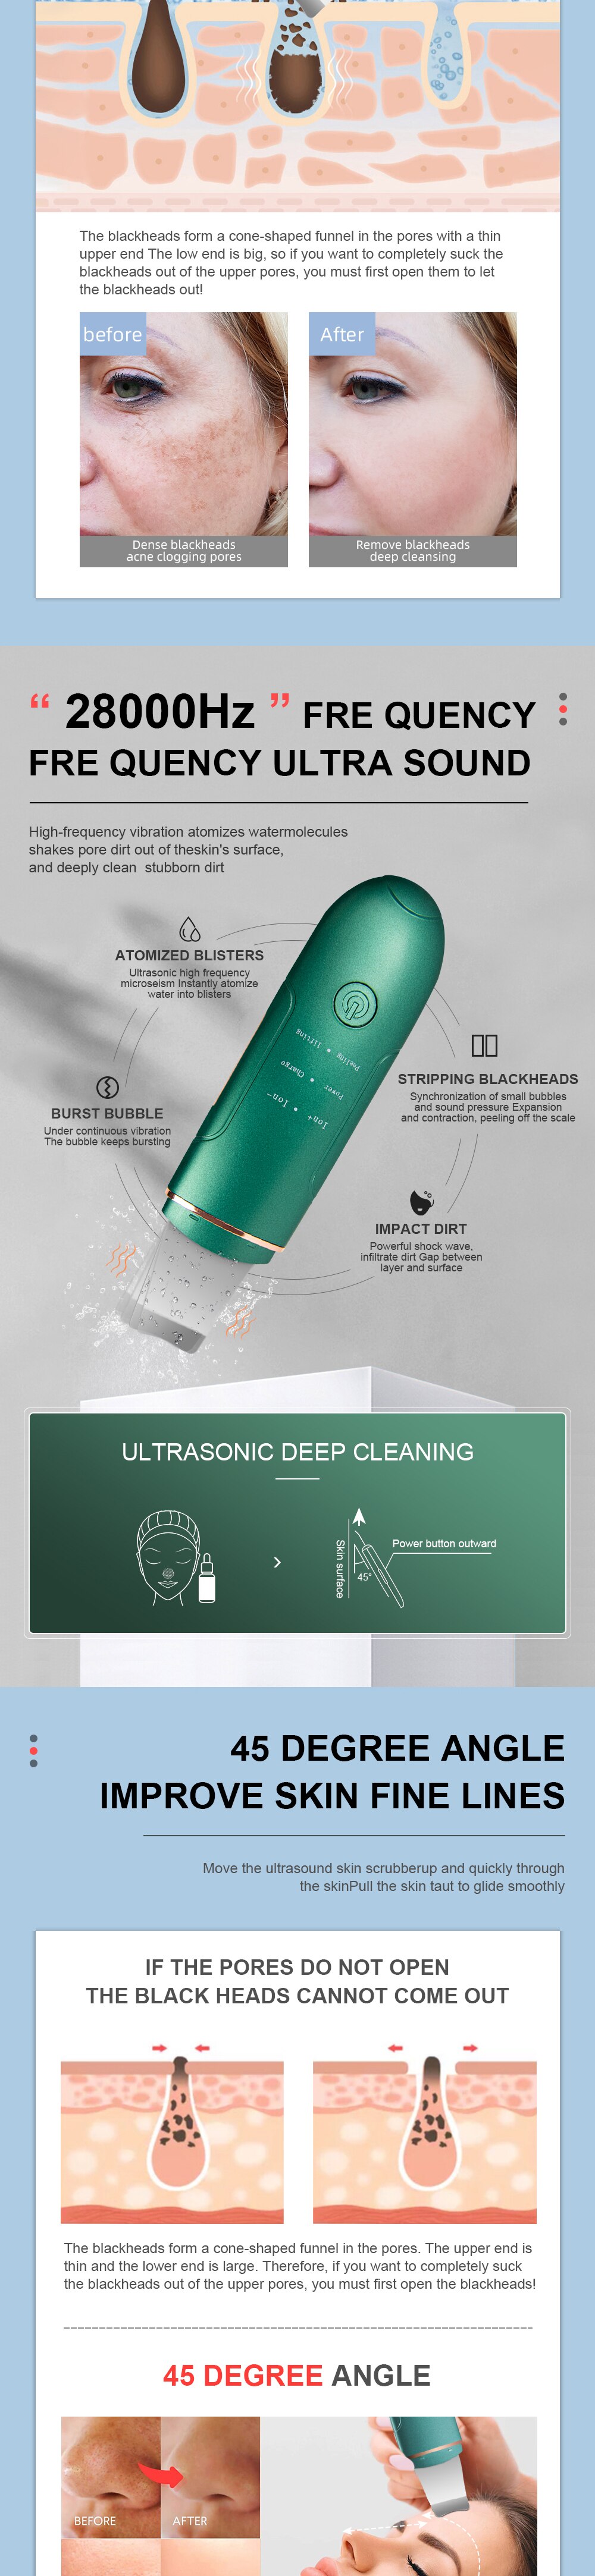 Ultrasonic Skin Scrubber Facial Cleansing Peeling Machine Blackhead Remover Pore Cleaner EMS LED Anti Aging Facial Massager EMS